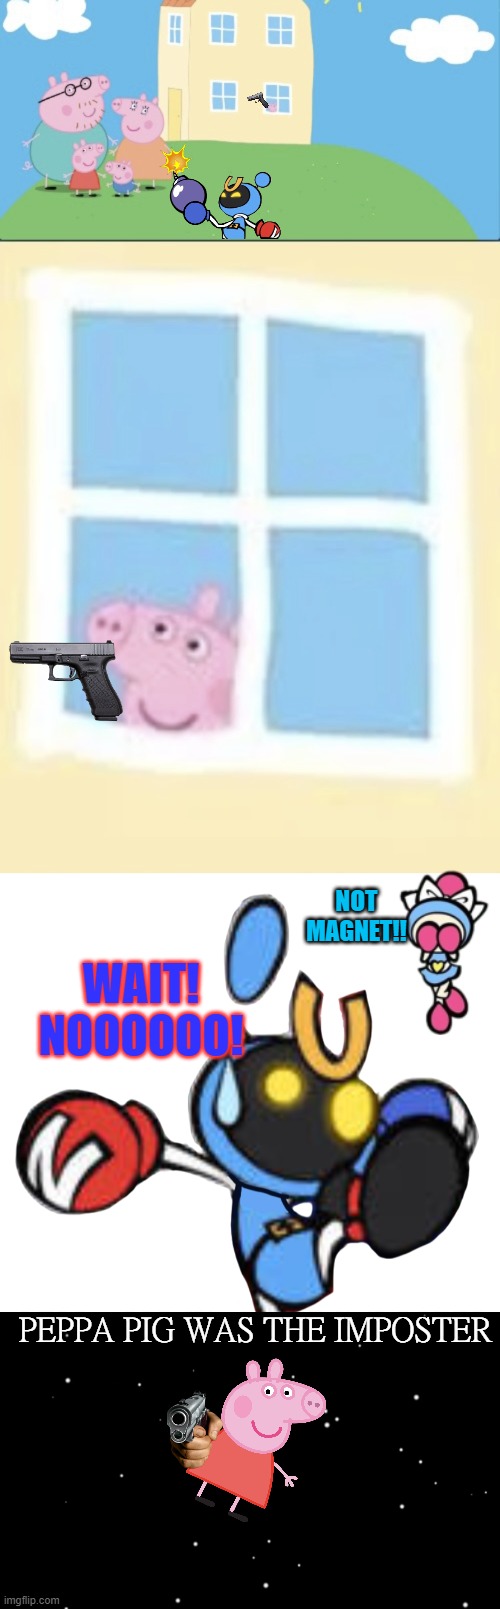 Imposter!! | WAIT! NOOOOOO! NOT MAGNET!! PEPPA PIG WAS THE IMPOSTER | image tagged in peppa pig home alone,magnet bomber scared,among us ejected,bomberman | made w/ Imgflip meme maker